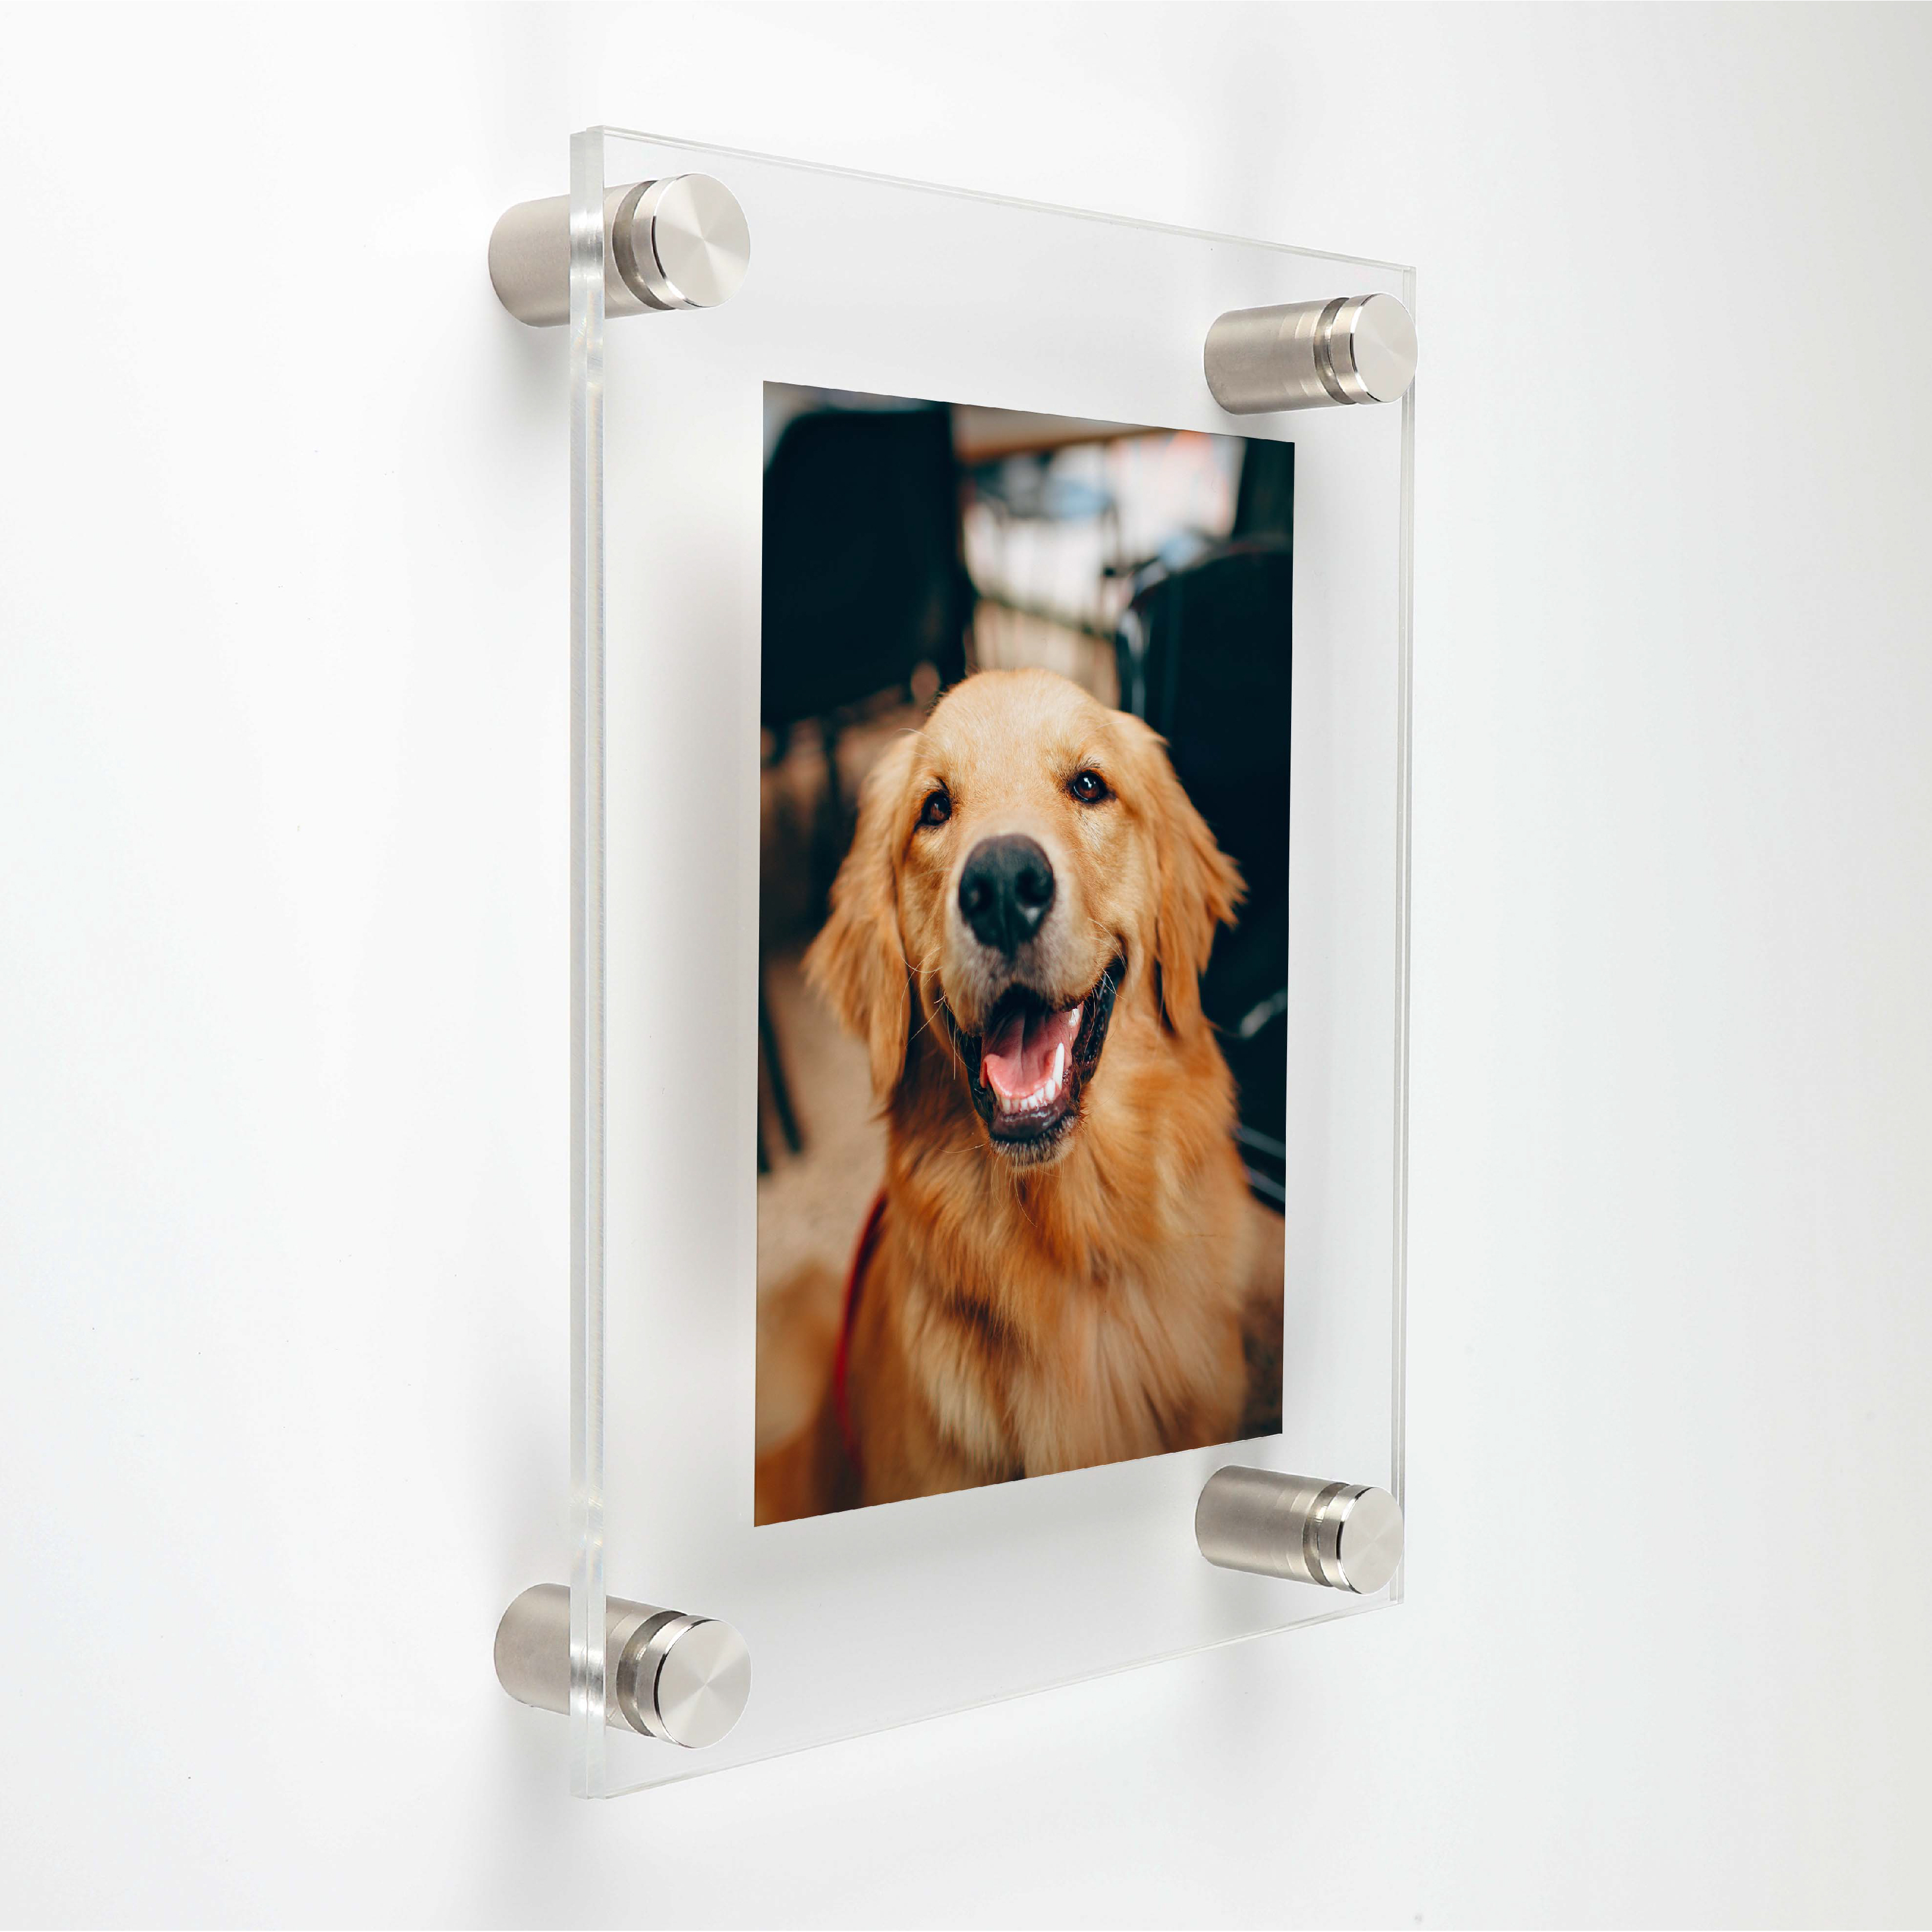 (2) 13-1/2'' x 16-1/2'' Clear Acrylics , Pre-Drilled With Polished Edges (Thick 1/8'' each), Wall Frame with (4) 3/4'' x 1'' Brushed Stainless Steel Standoffs includes Screws and Anchors